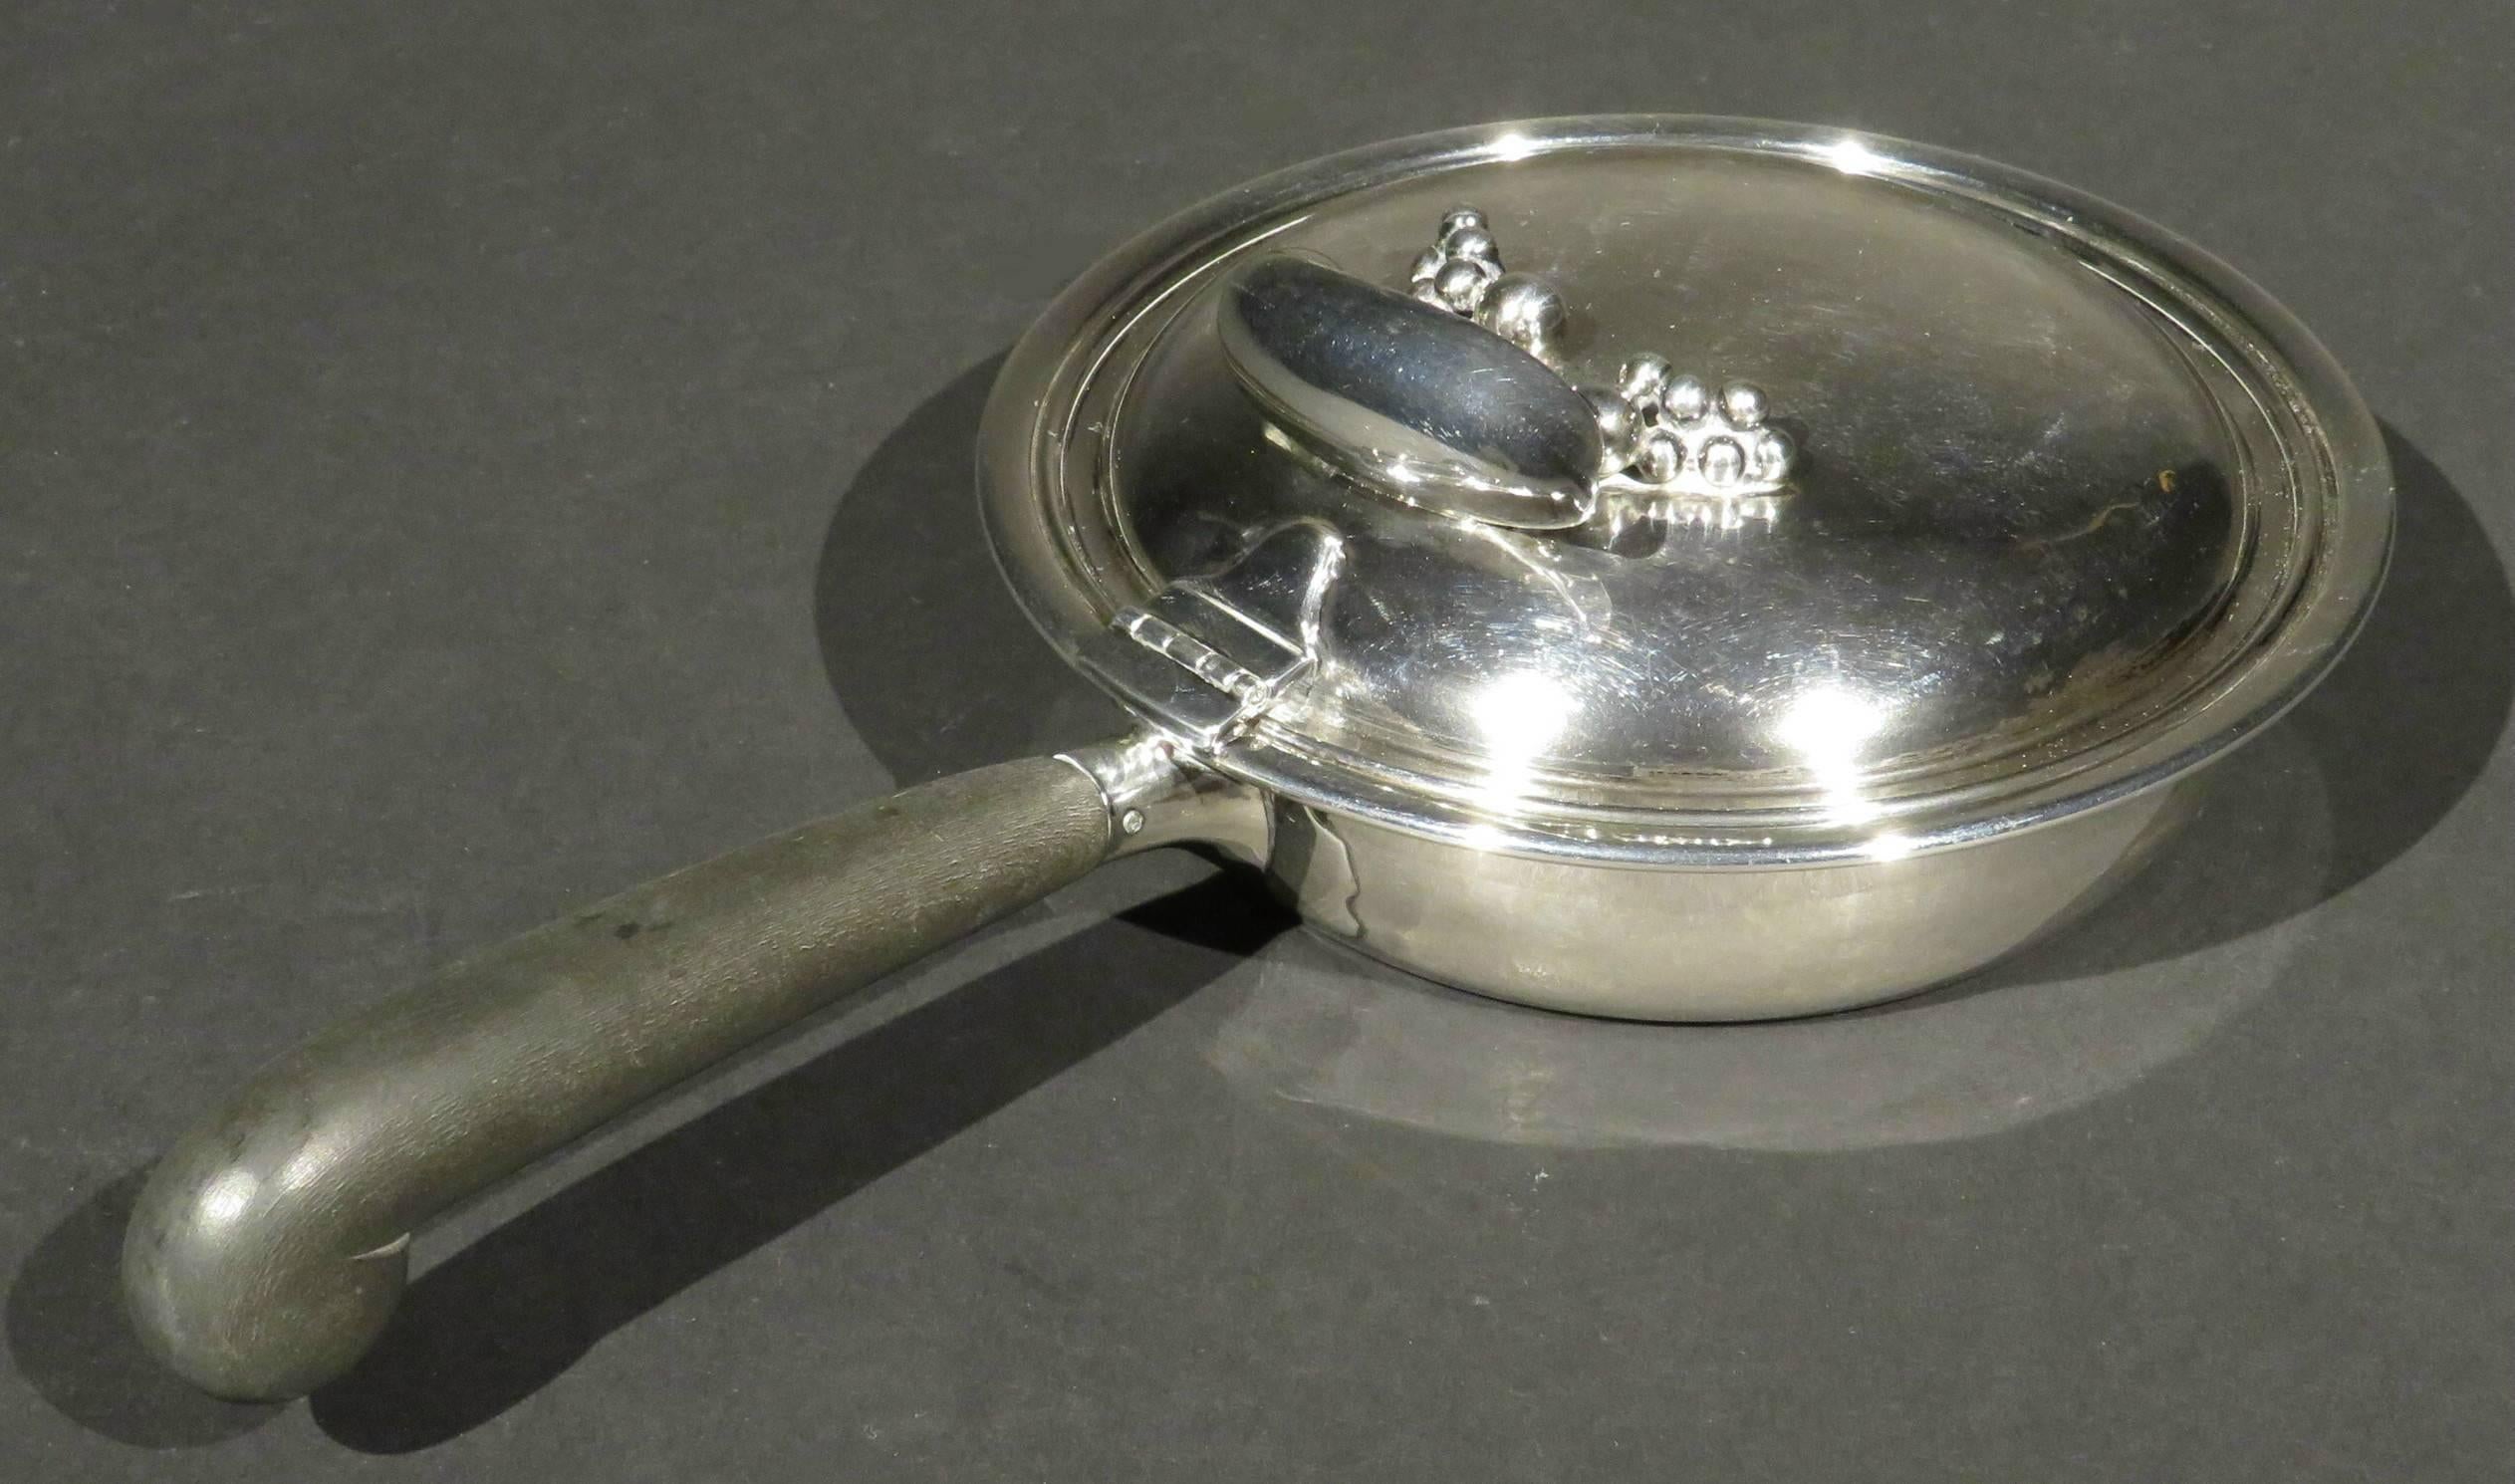 The sterling silver body fitted with an ebonized wood handle, affixed with a hinged lid having a subtle planished surface and an applied organic inspired element. 
Carl Poul Petersen (b. Denmark 1895 – d. Canada 1977) apprenticed with Georg Jensen